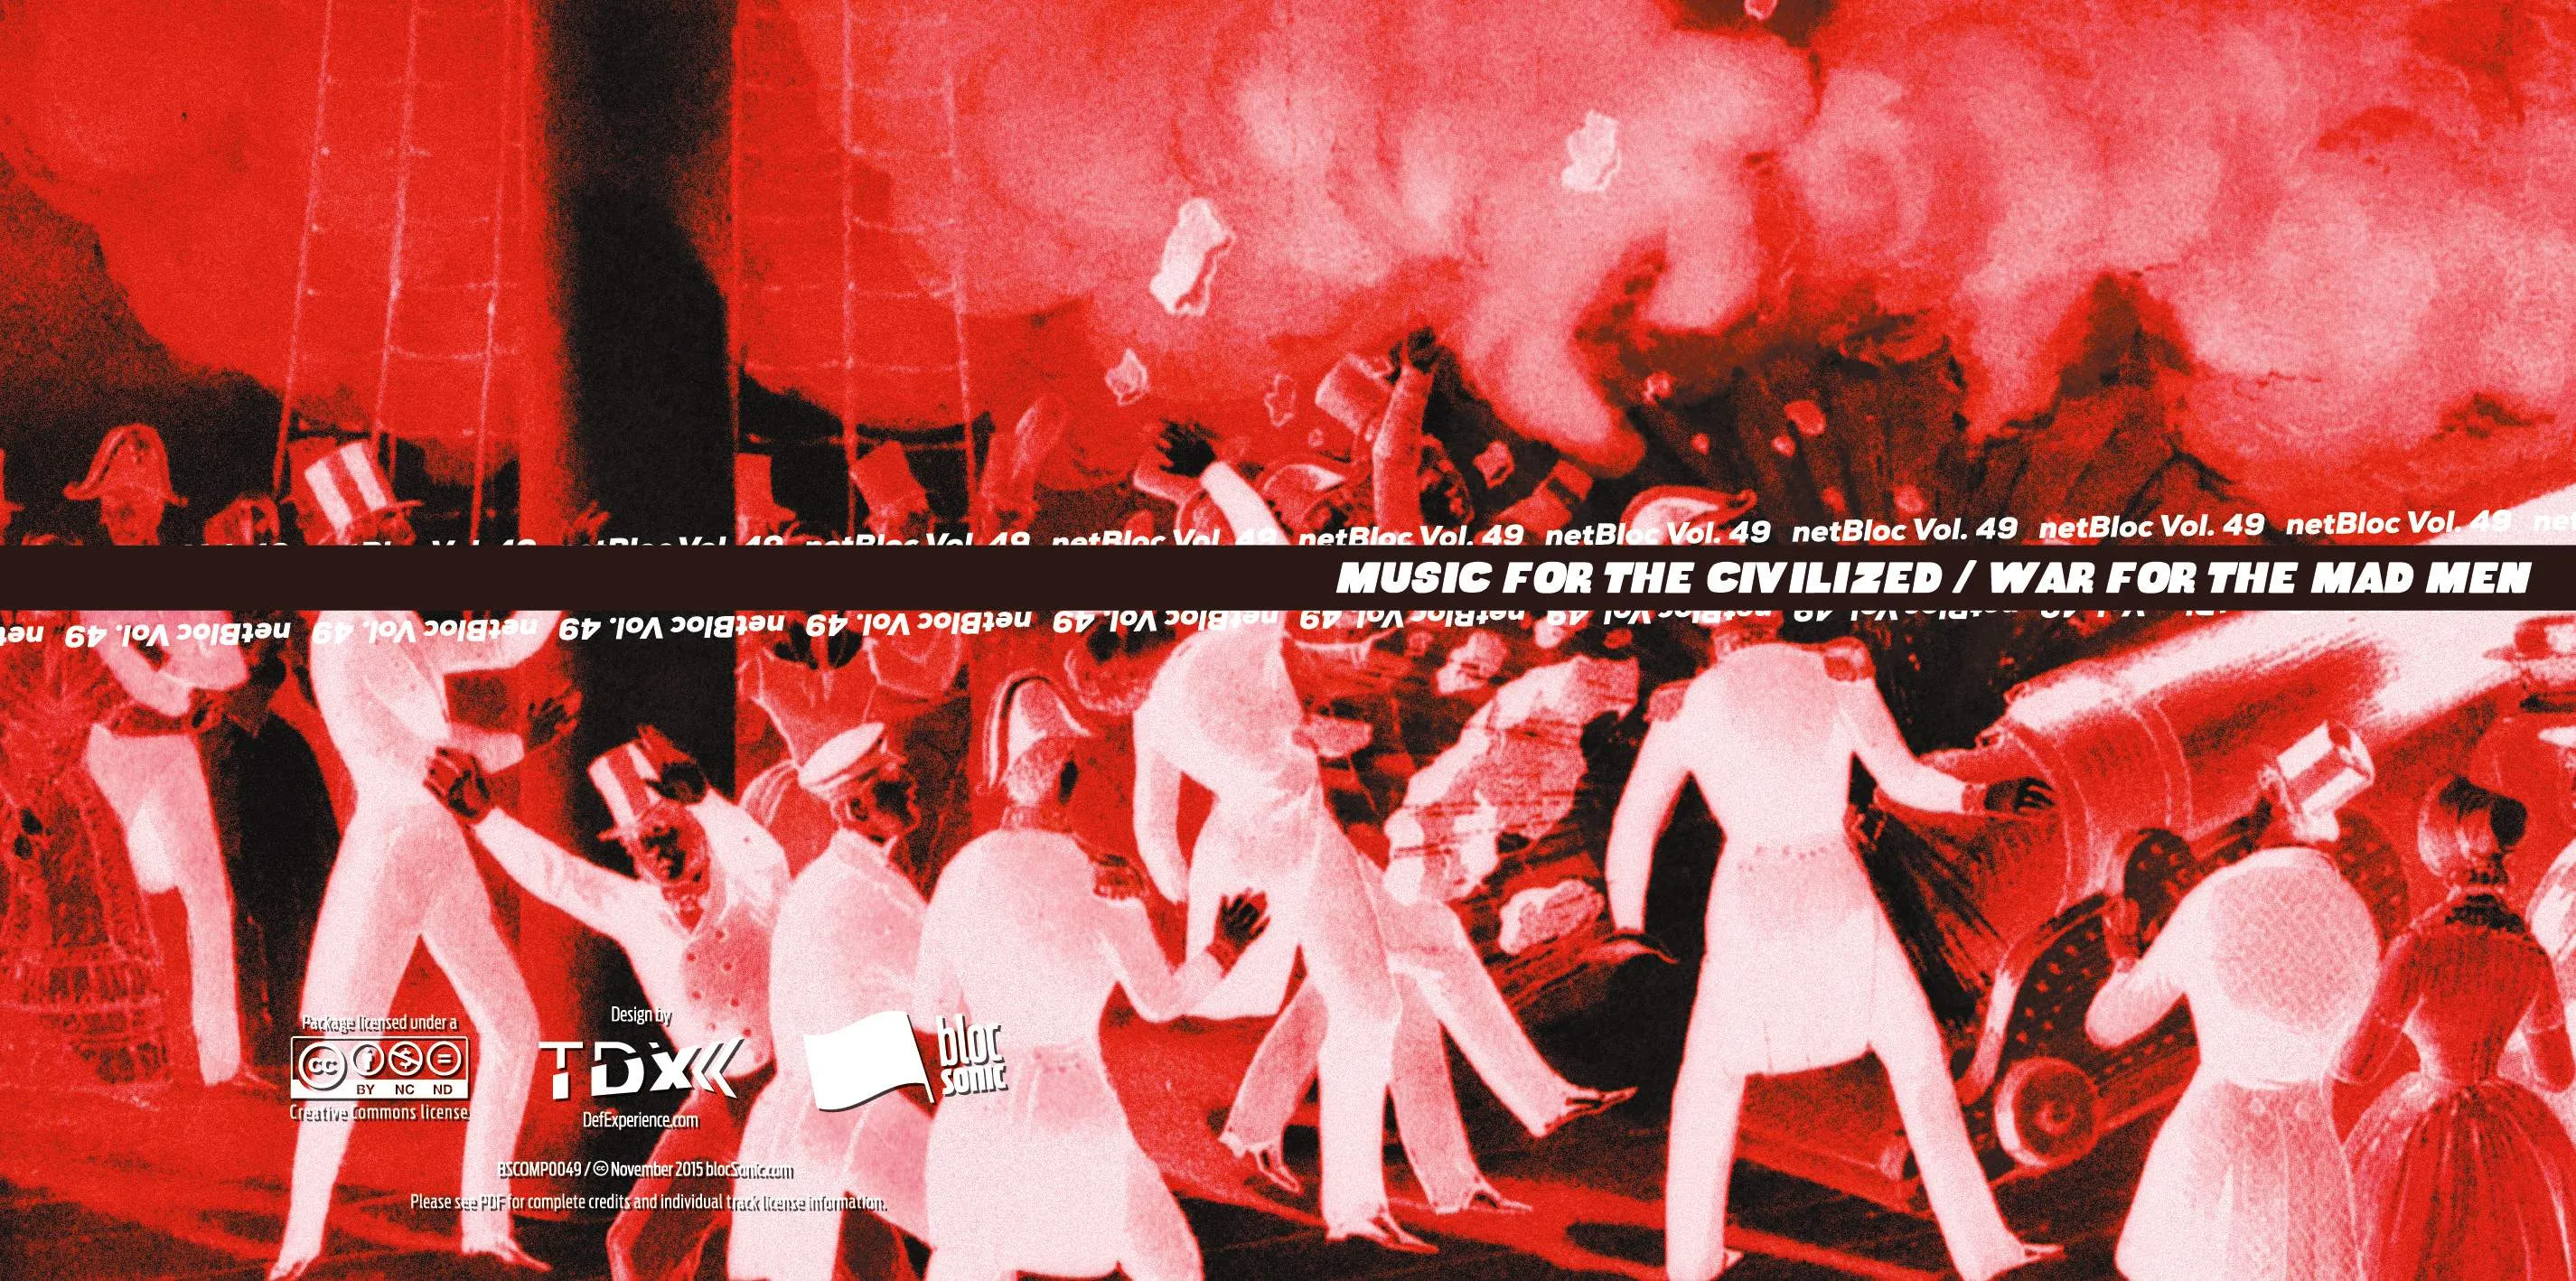 Album insert for “netBloc Vol. 49: Music For The Civilized / War For The Mad Men” by Various Artists